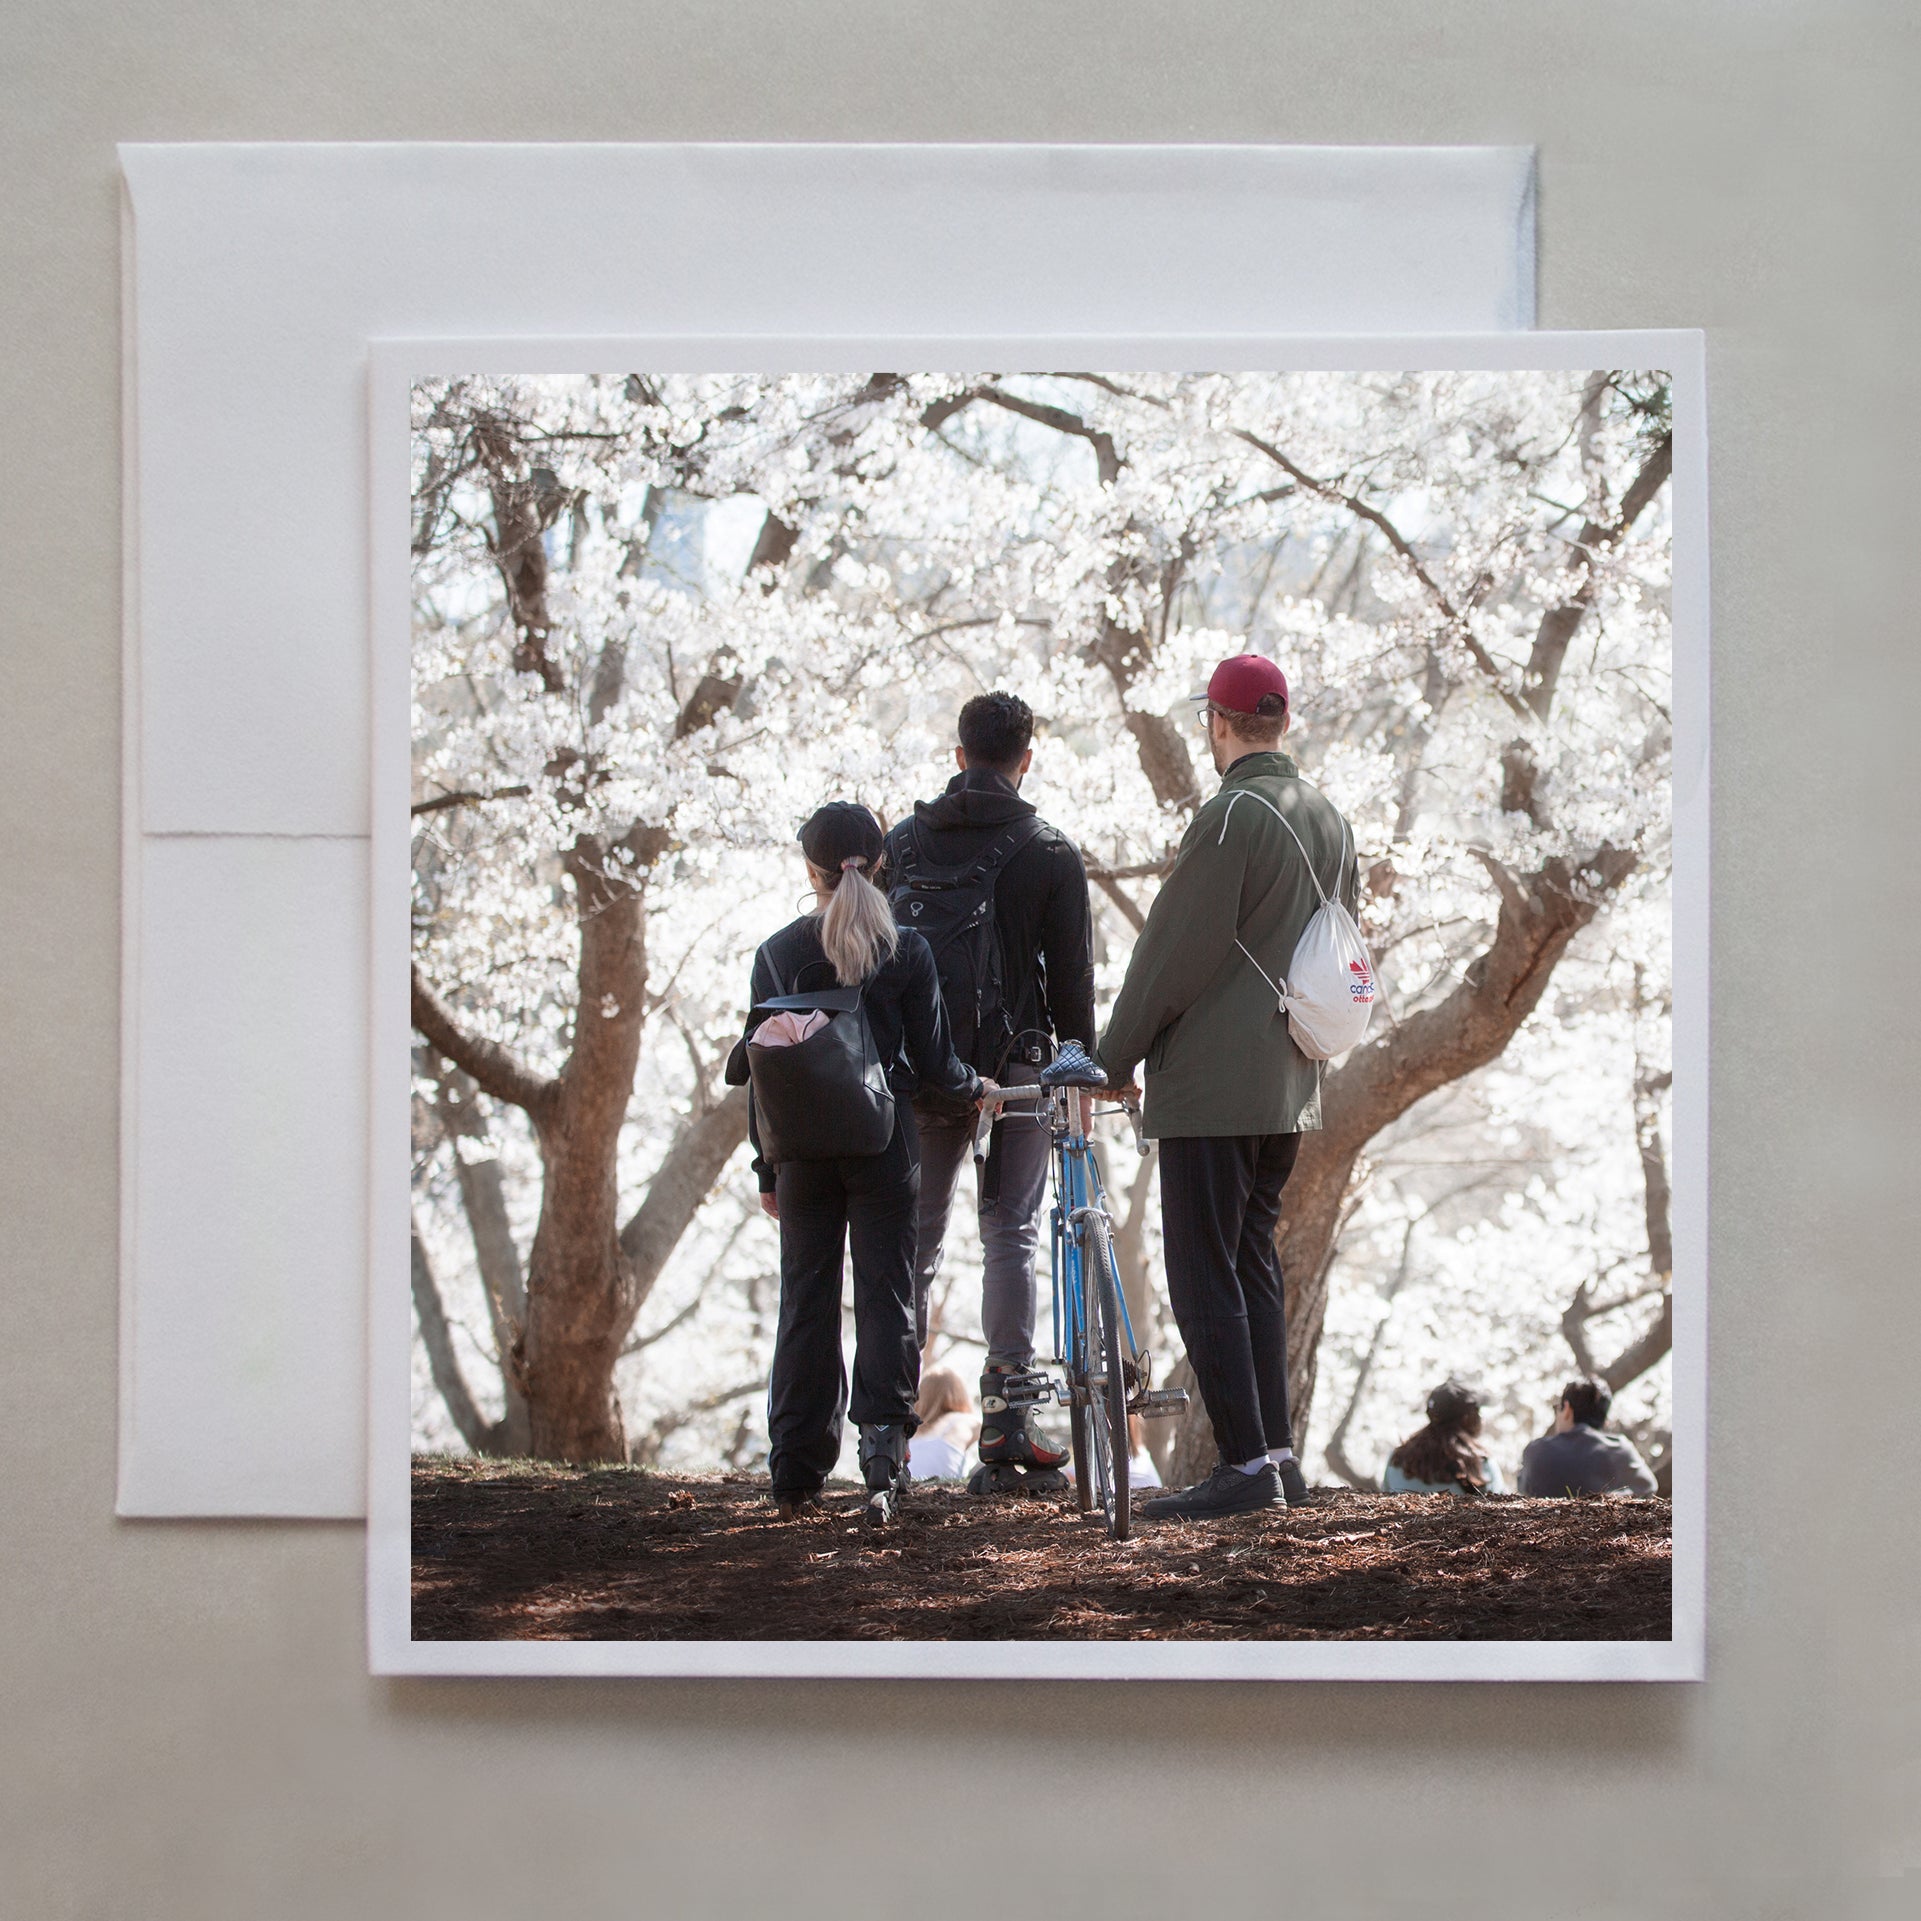 Three friends stand amongst the glorious High Park cherry blossoms in this photo greeting card by photographer Caley Taylor.  